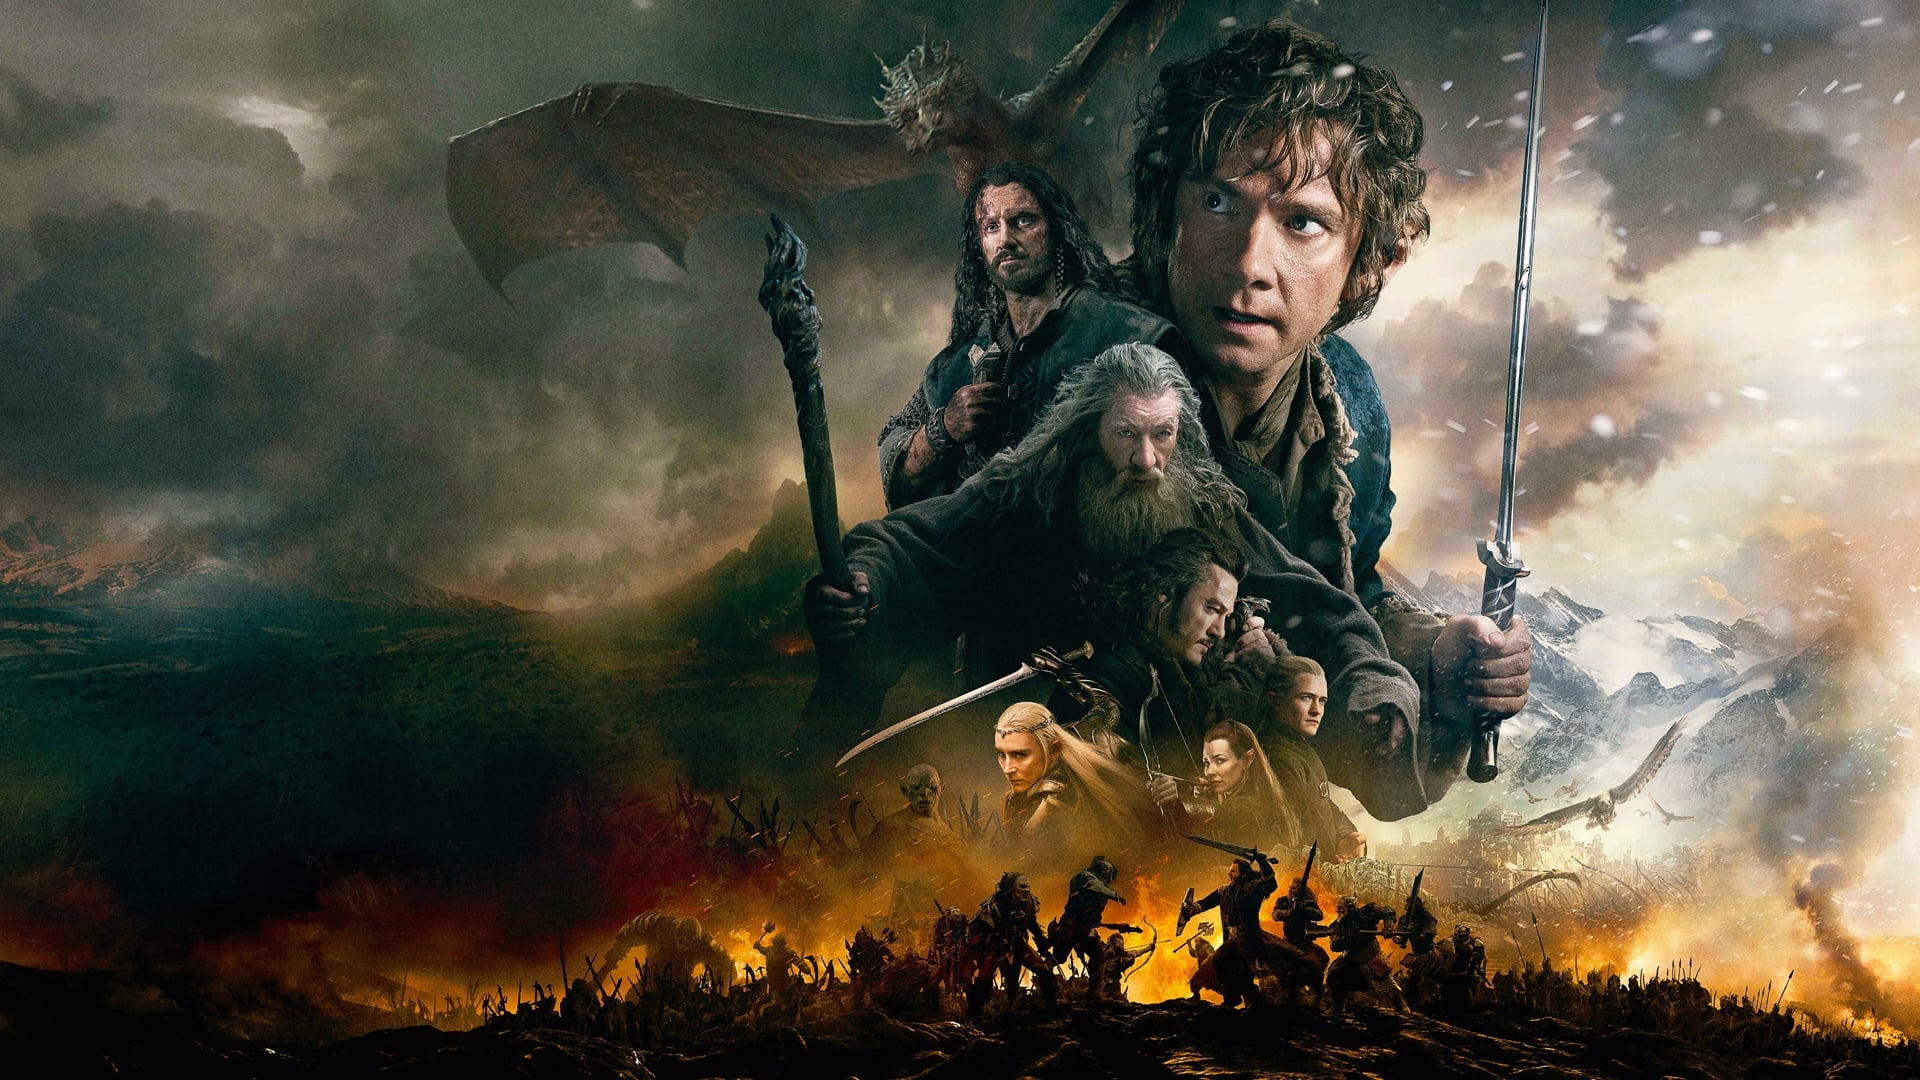 The Hobbit: the Battle of the Five Armies (The Hobbit: the Battle of the Five Armies)